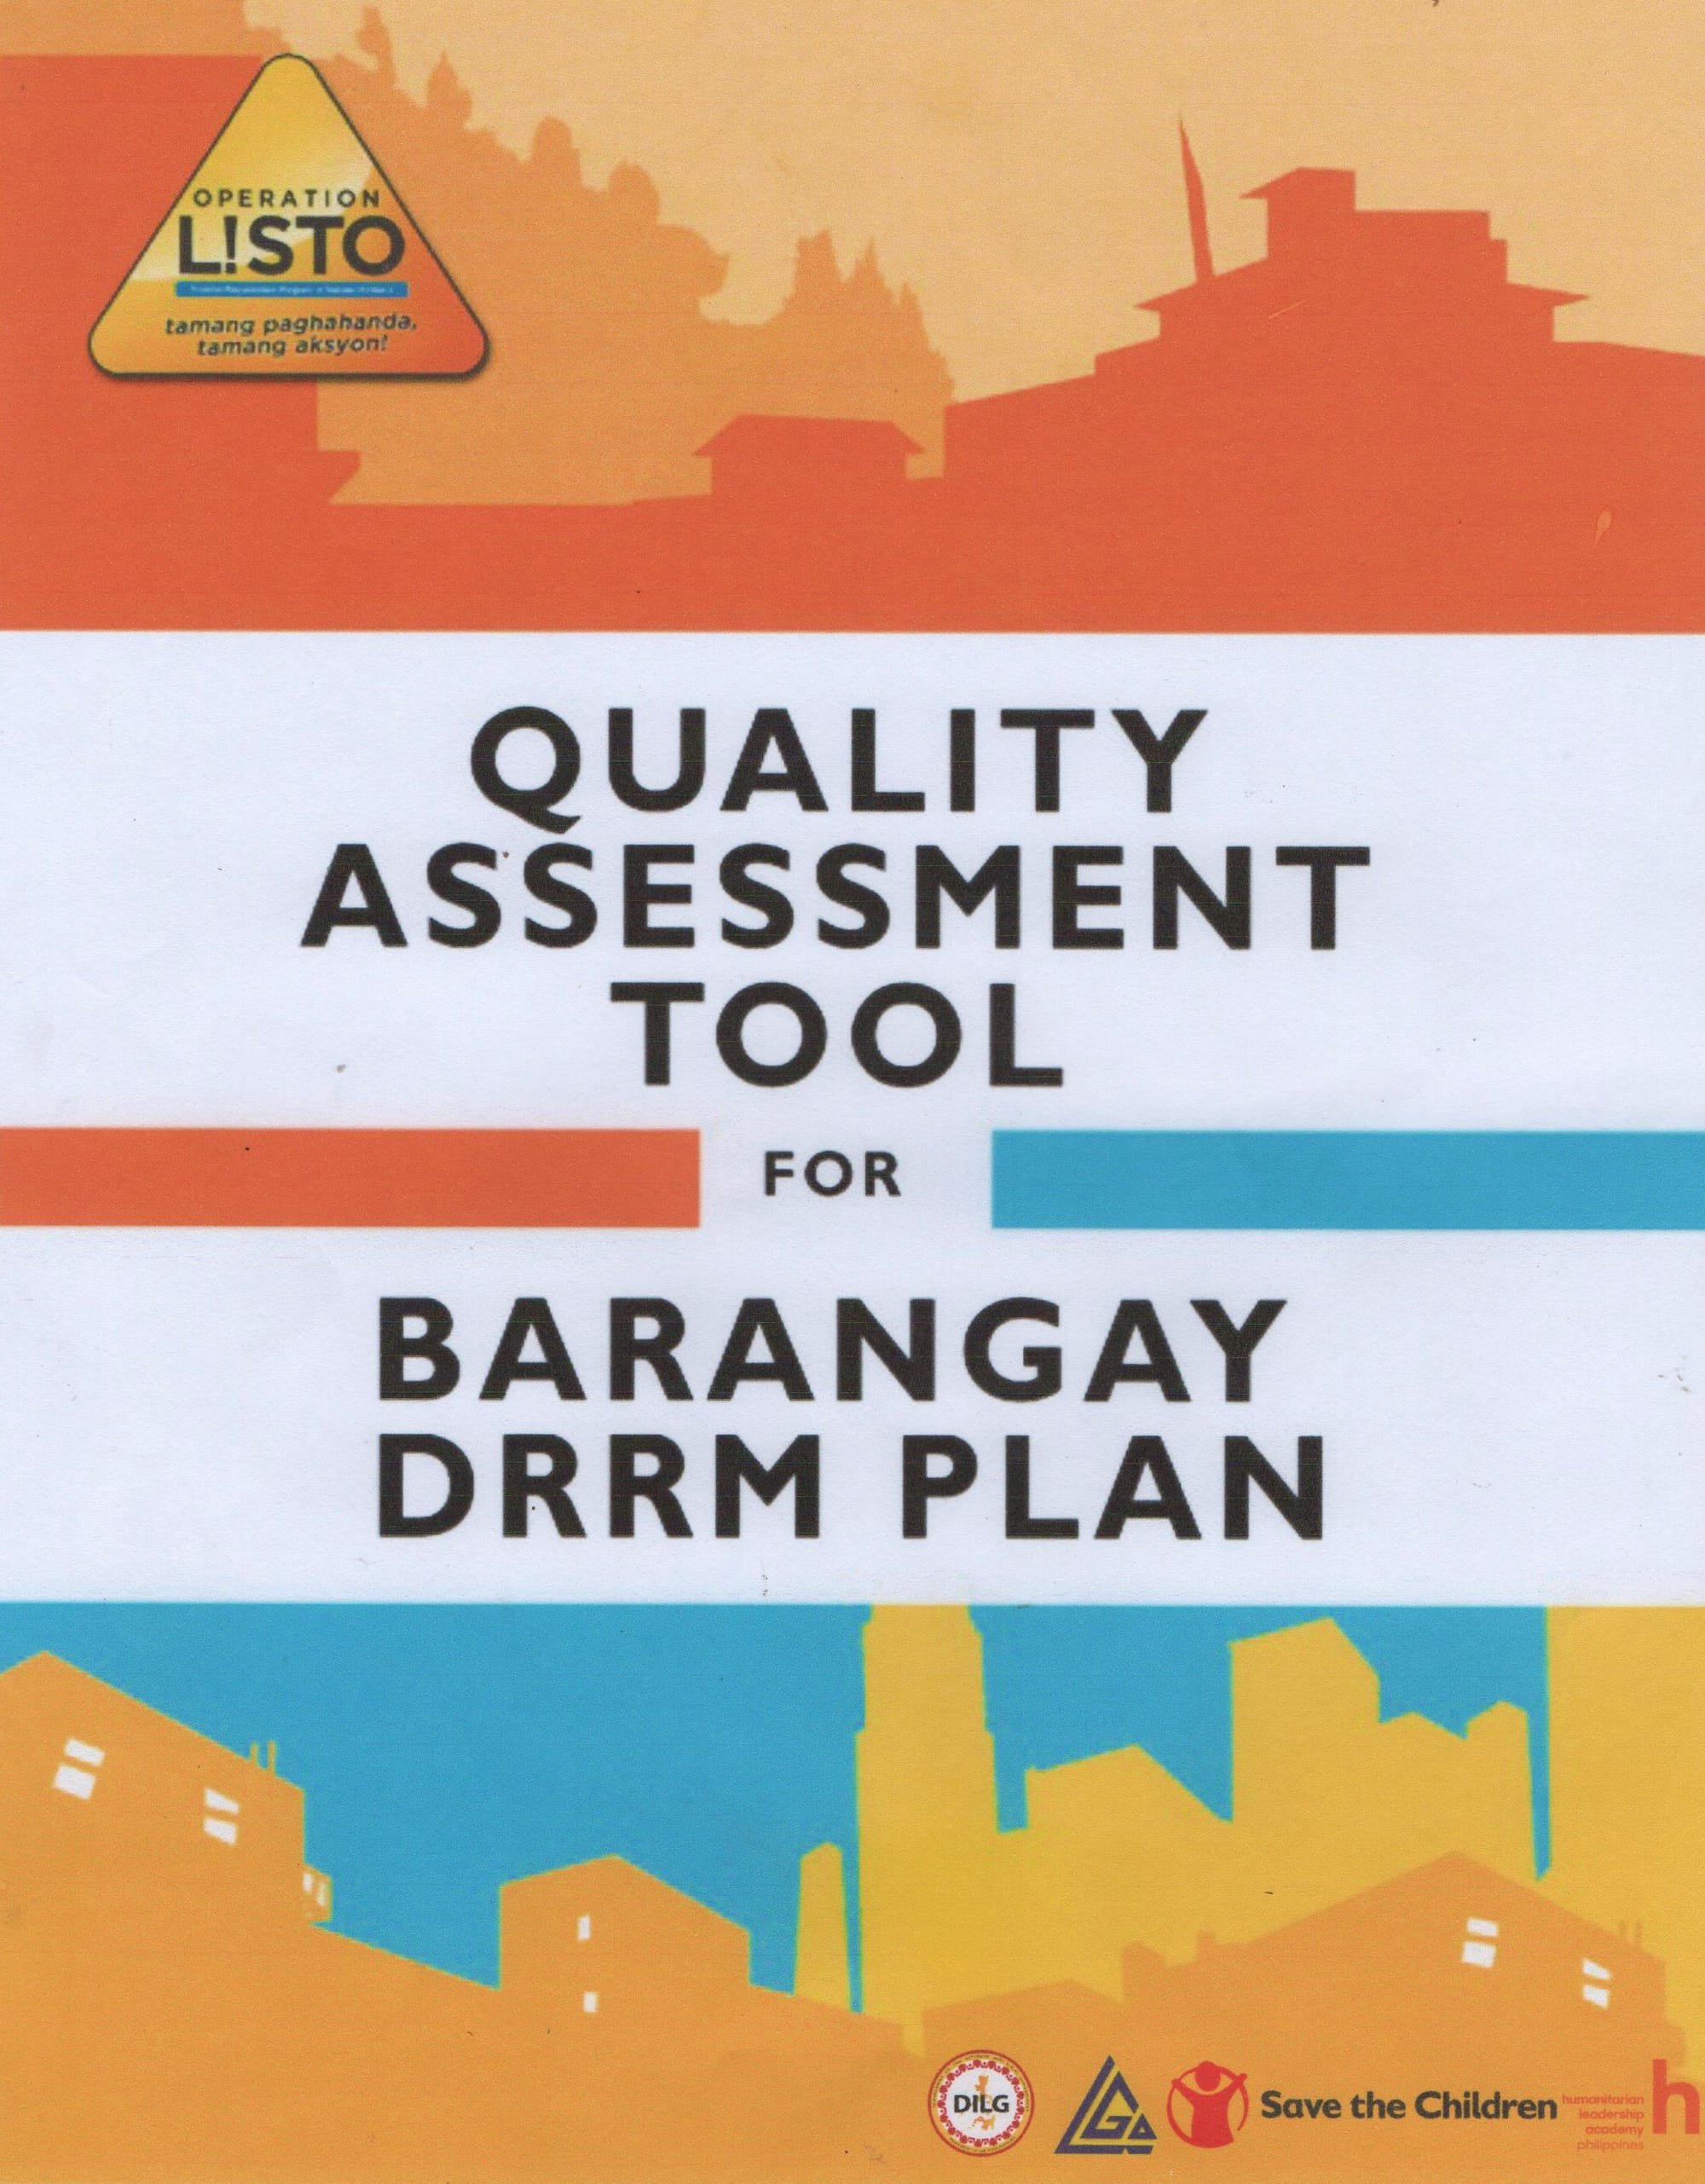 BDRRM PLANNING AND WORKSHOP: A WAY TO MAKE THE BARANGAYS READY